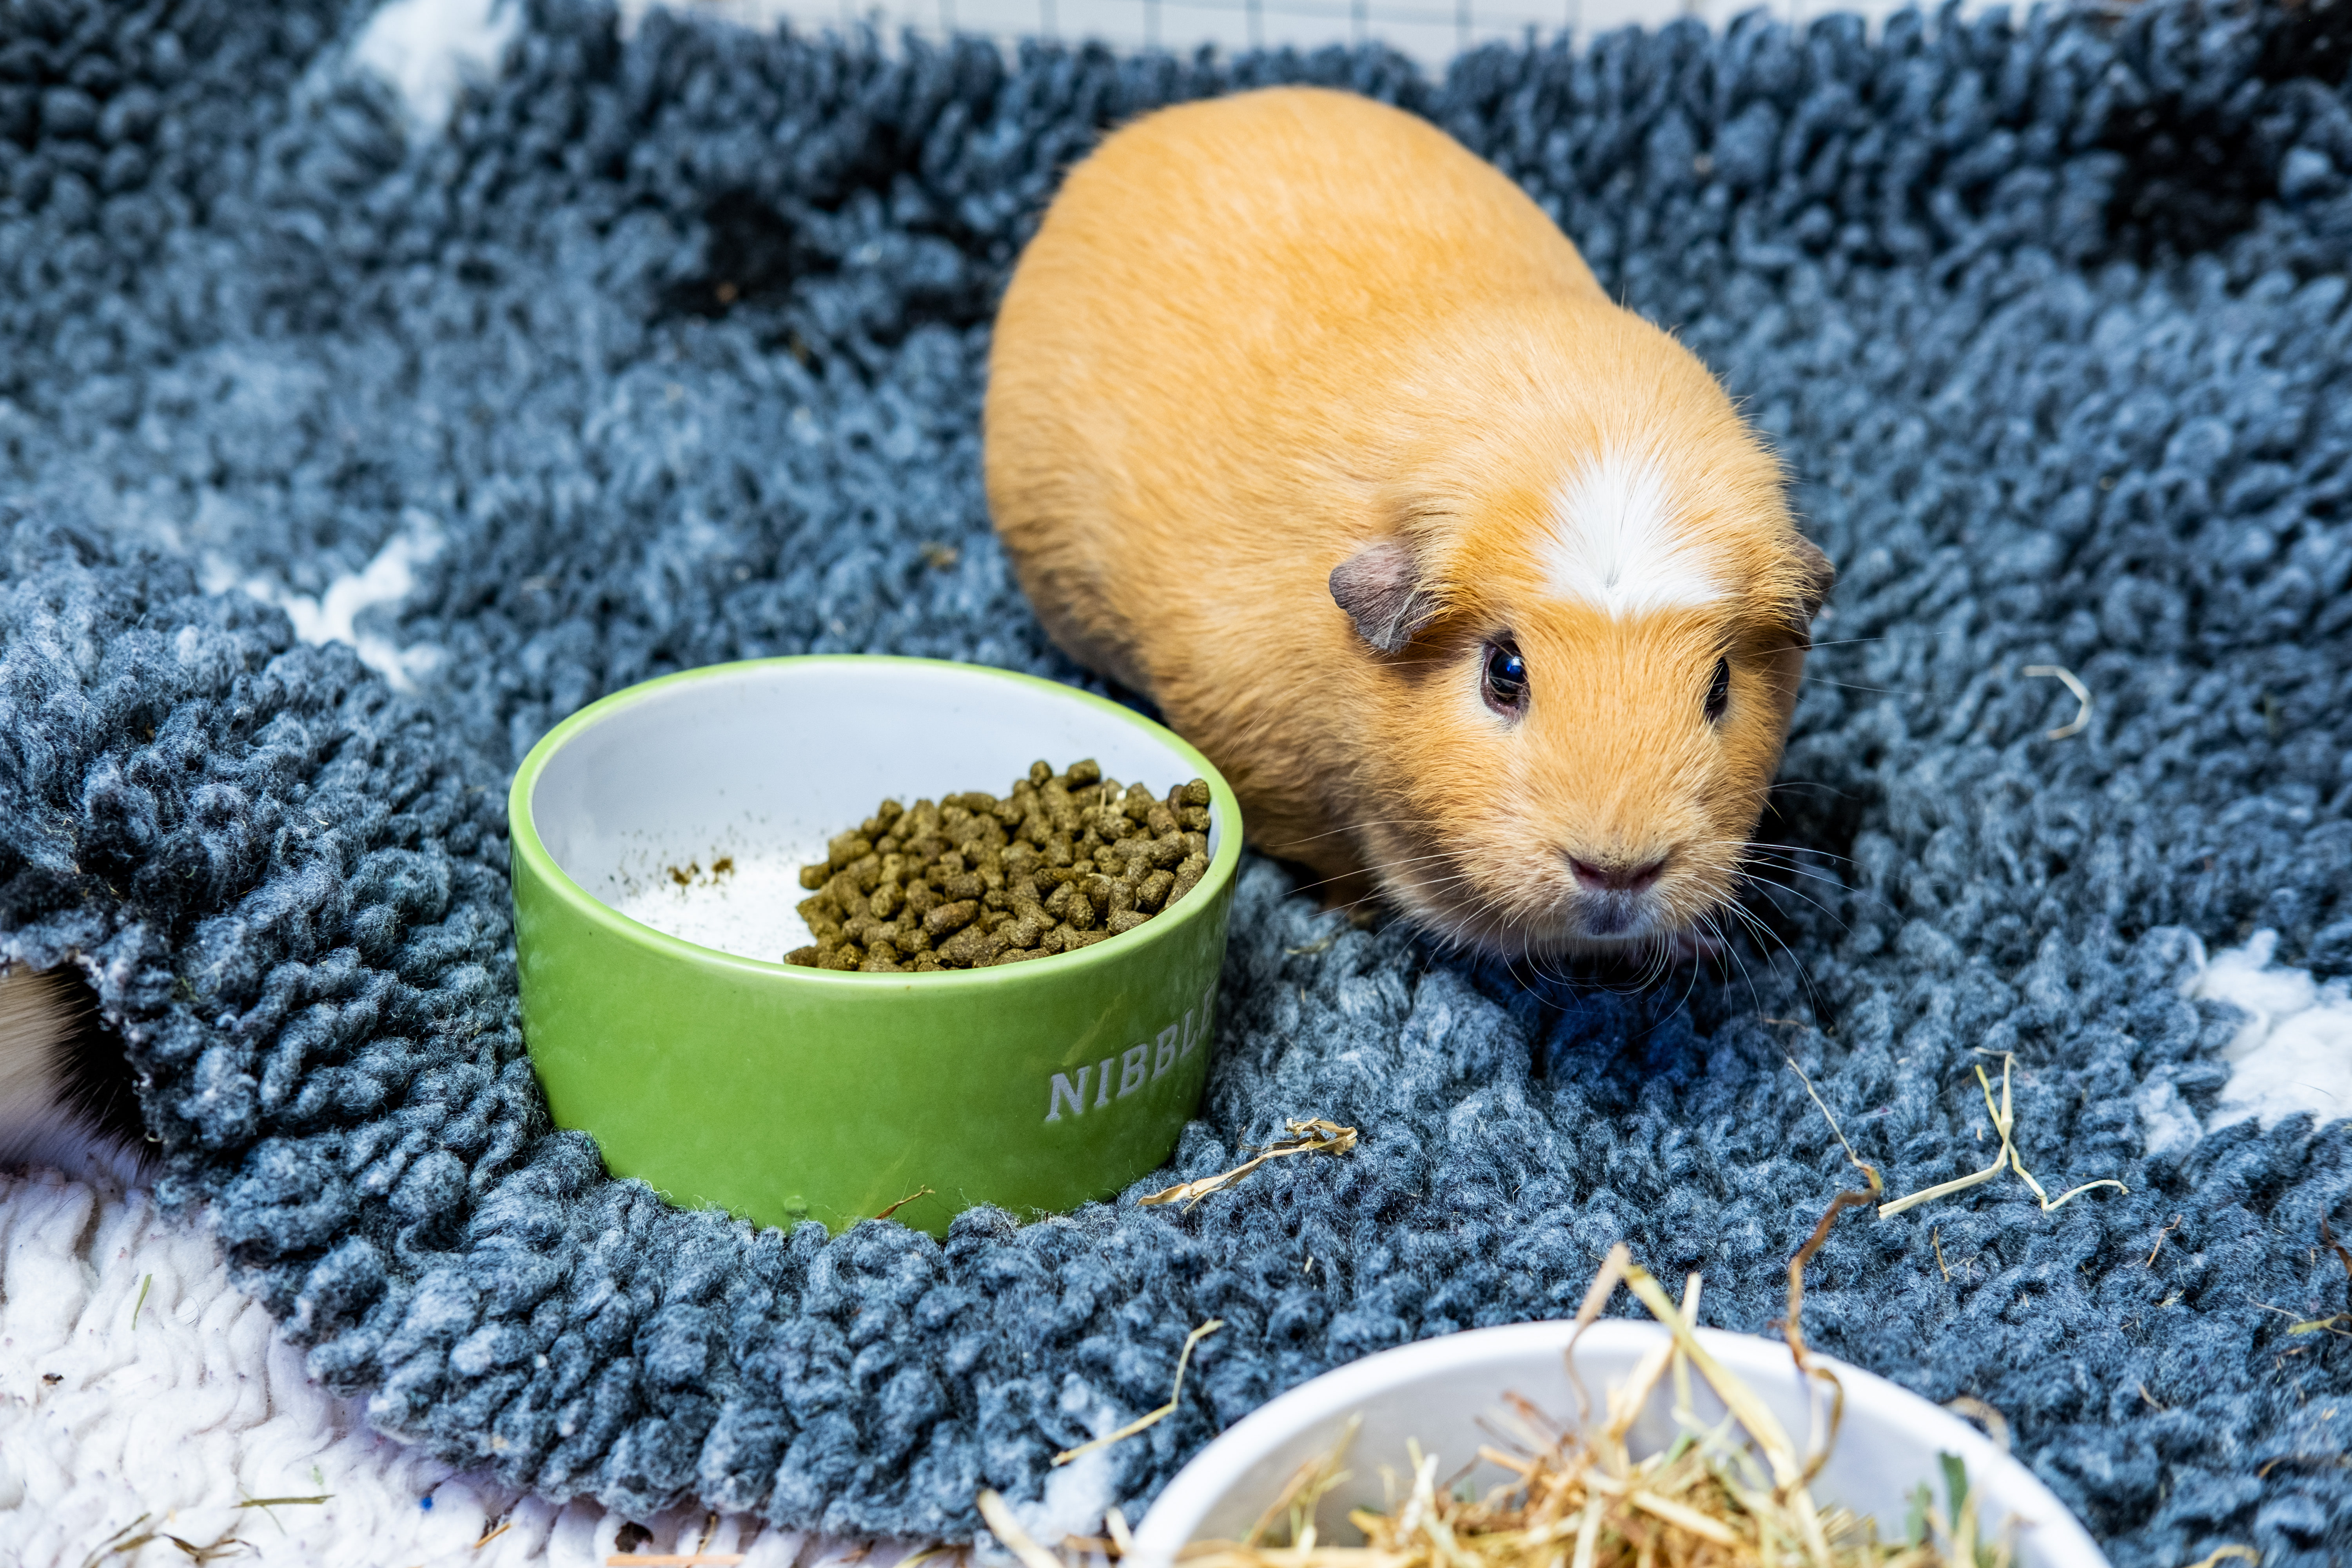 A ginger guinea pig sitting by their bowl of food.